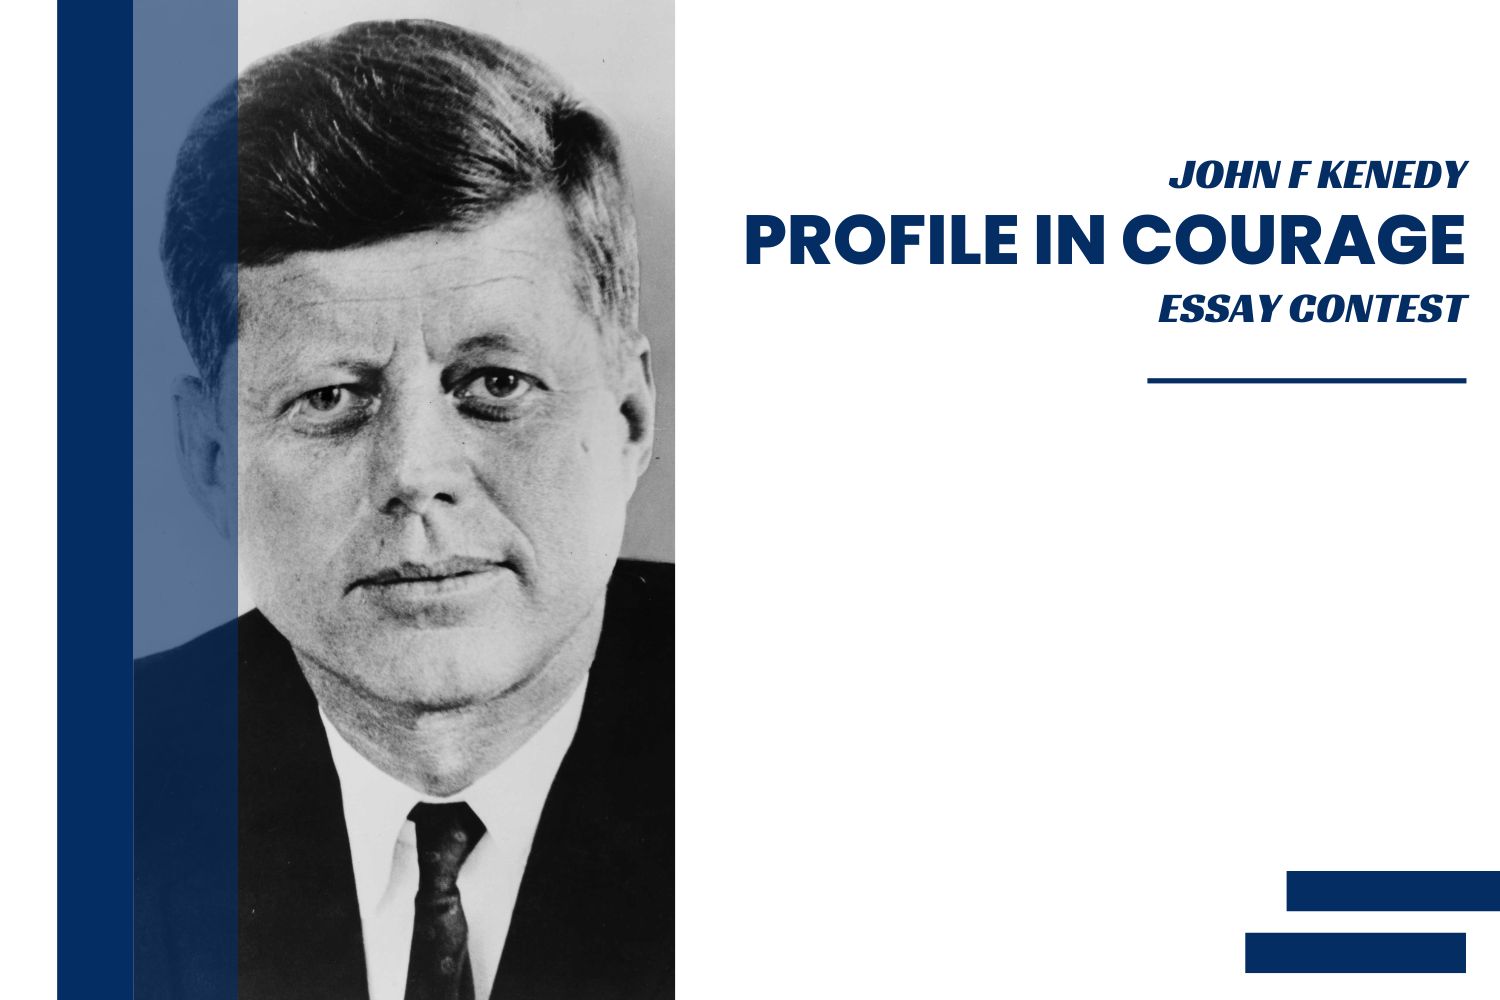 kennedy profiles in courage essay